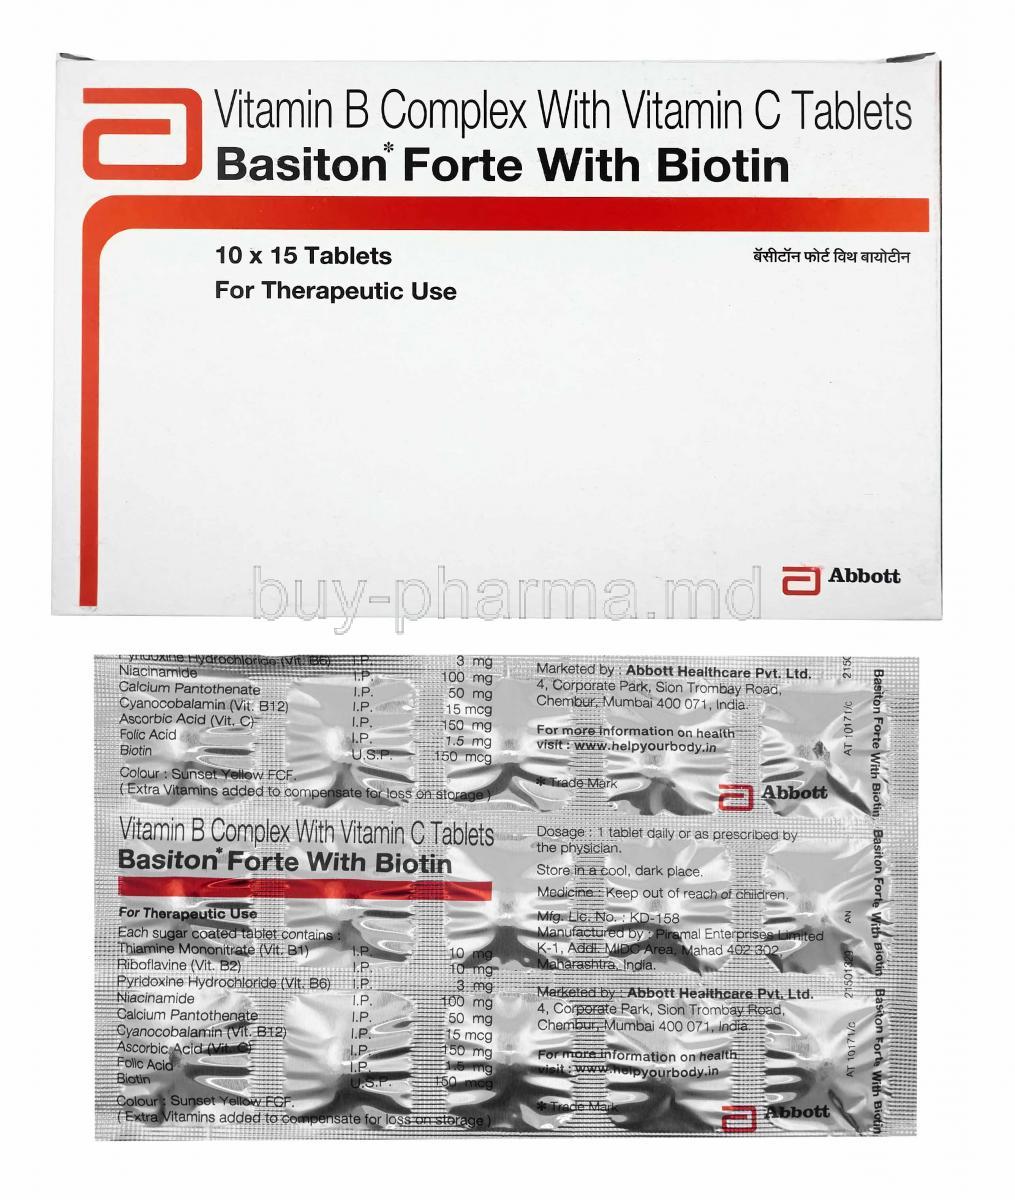 Basiton Forte with Biotin box and tablets